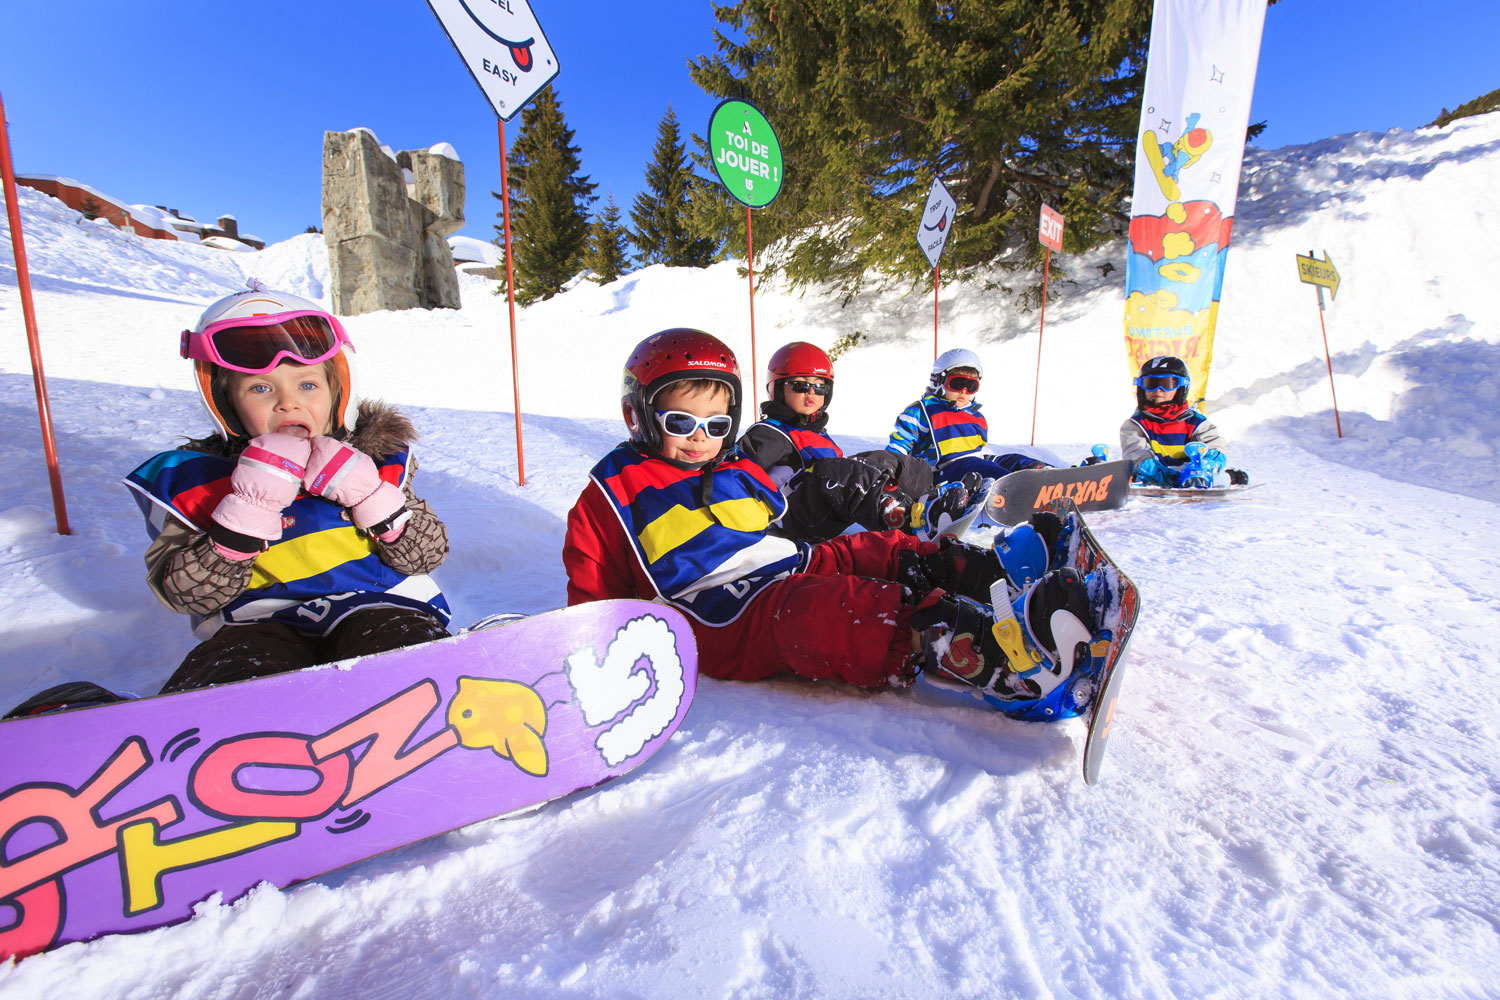 Kids Learning to snowboard in Avoriaz - Pascal Gombert 